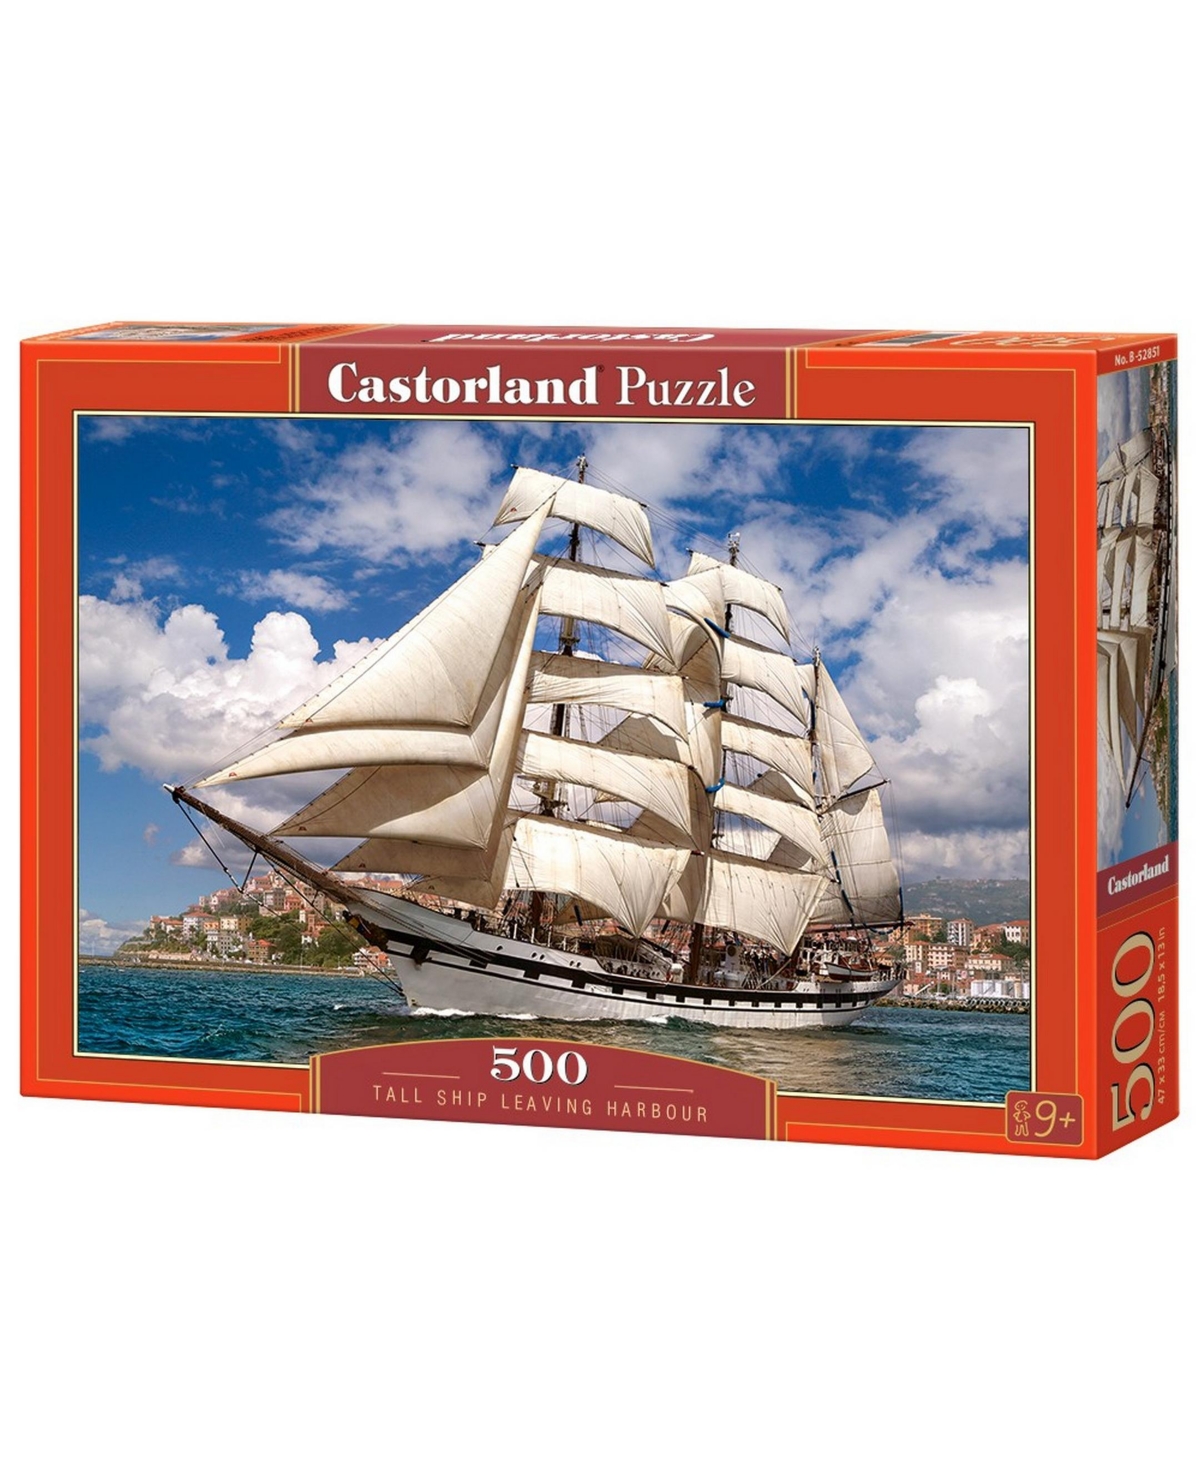 Castorland Tall Ship Leaving Harbor Jigsaw Puzzle Set, 500 Piece In Multicolor